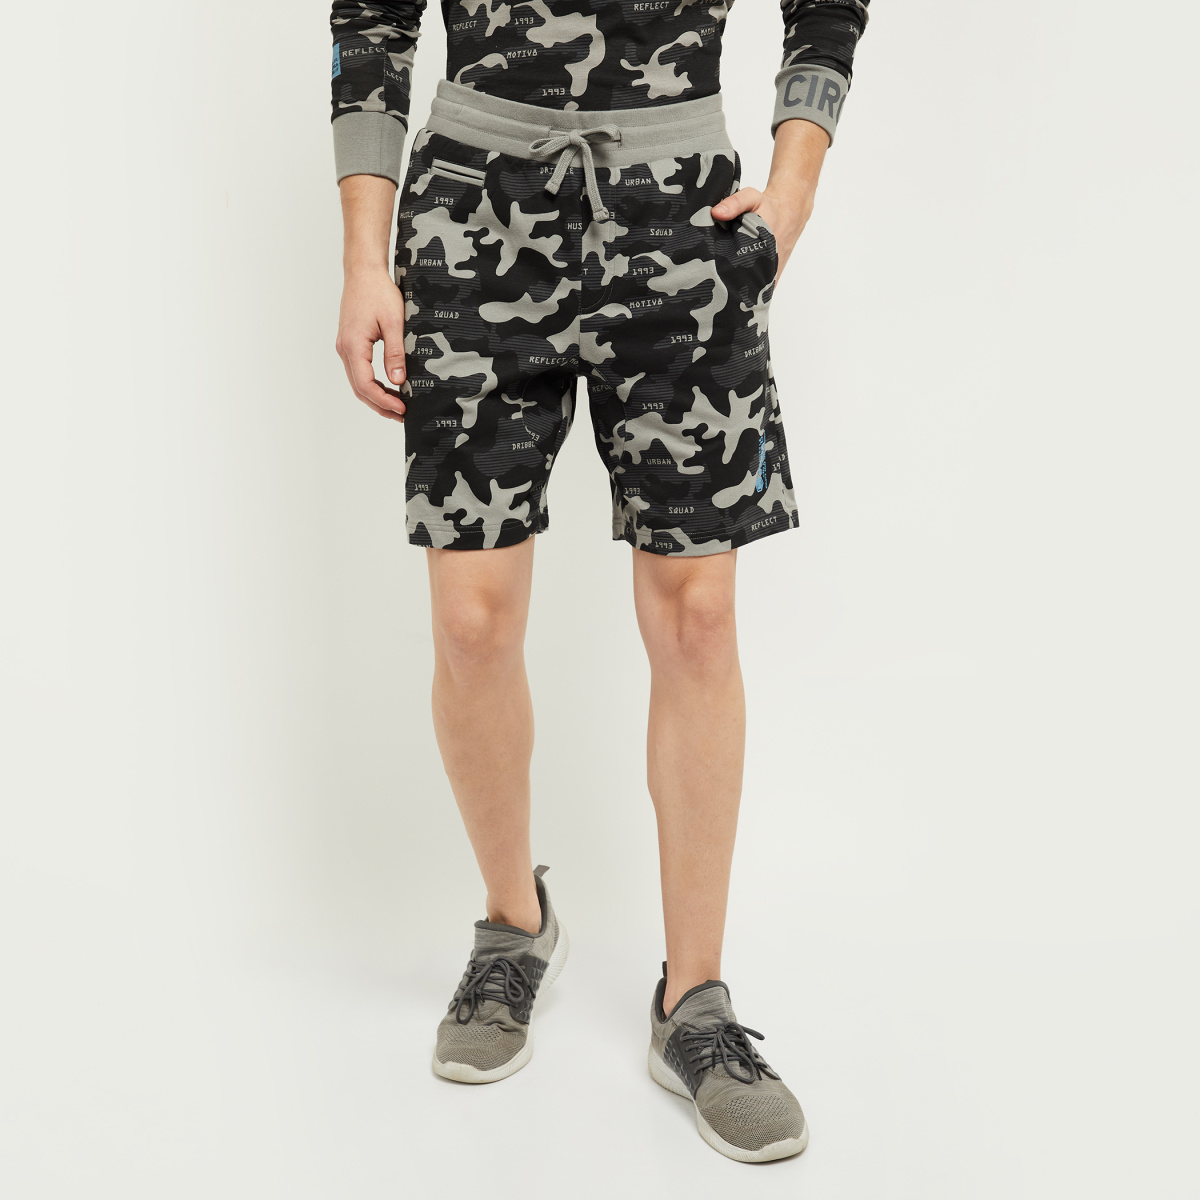 MAX Camouflage Printed Sports Shorts